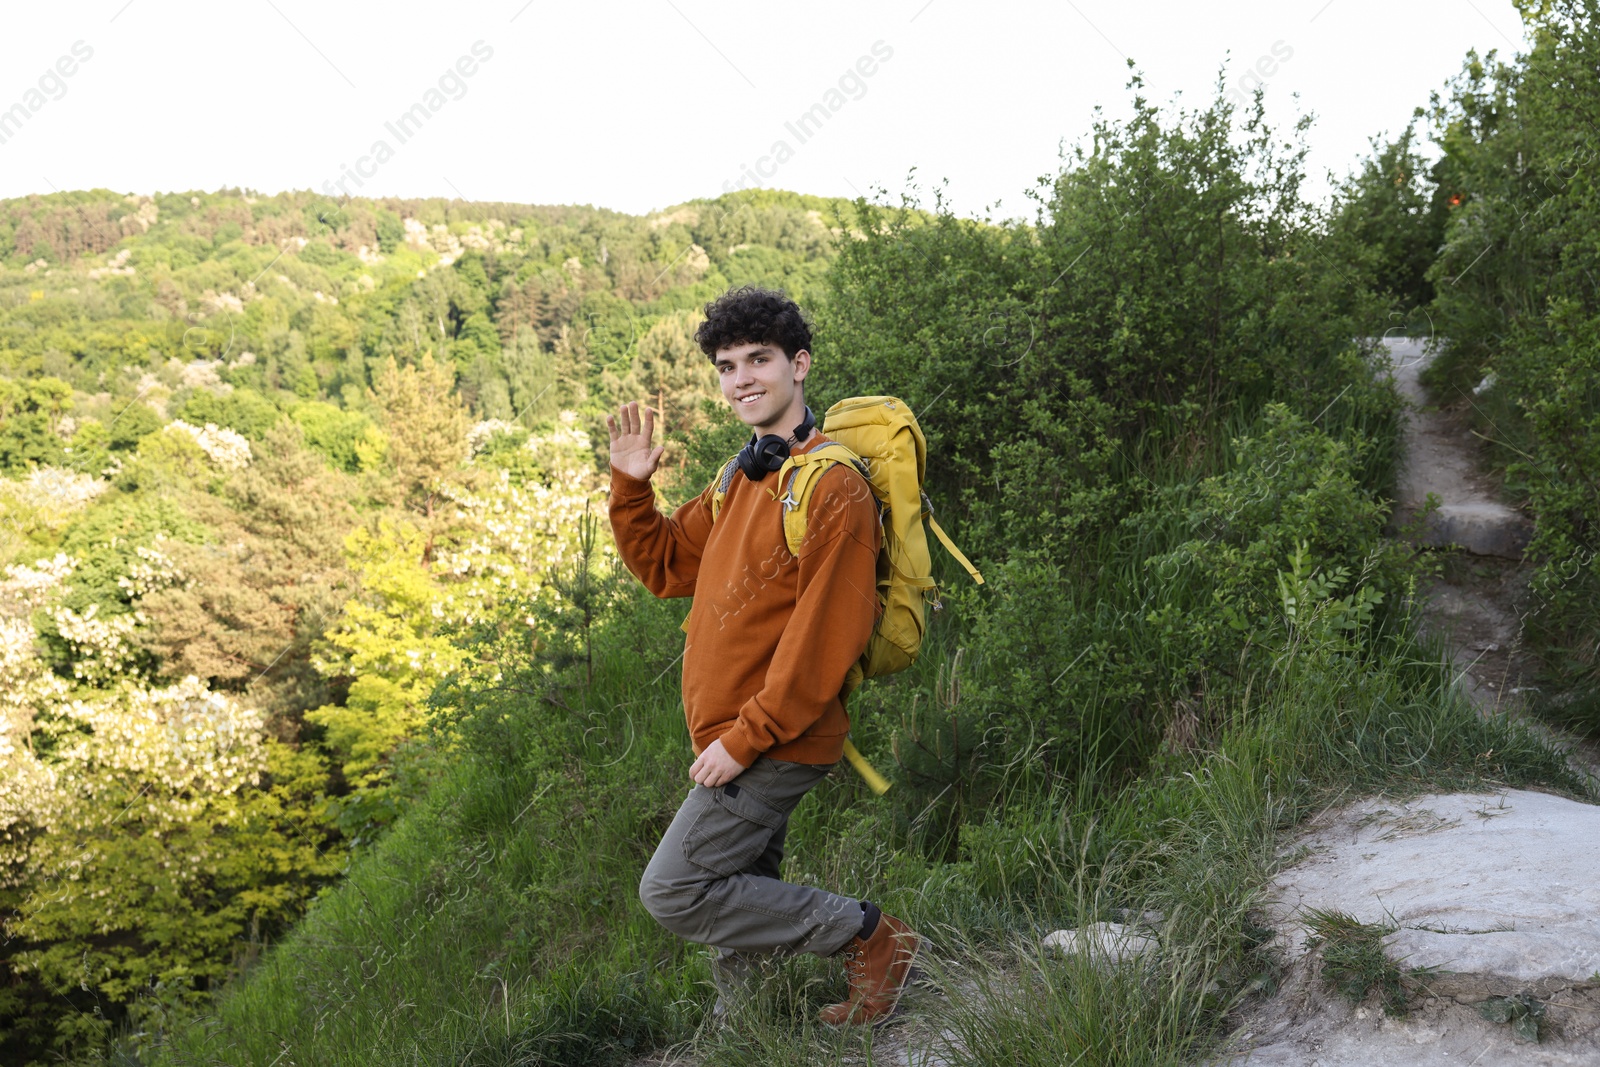 Photo of Travel blogger with headphones and backpack recording video outdoors